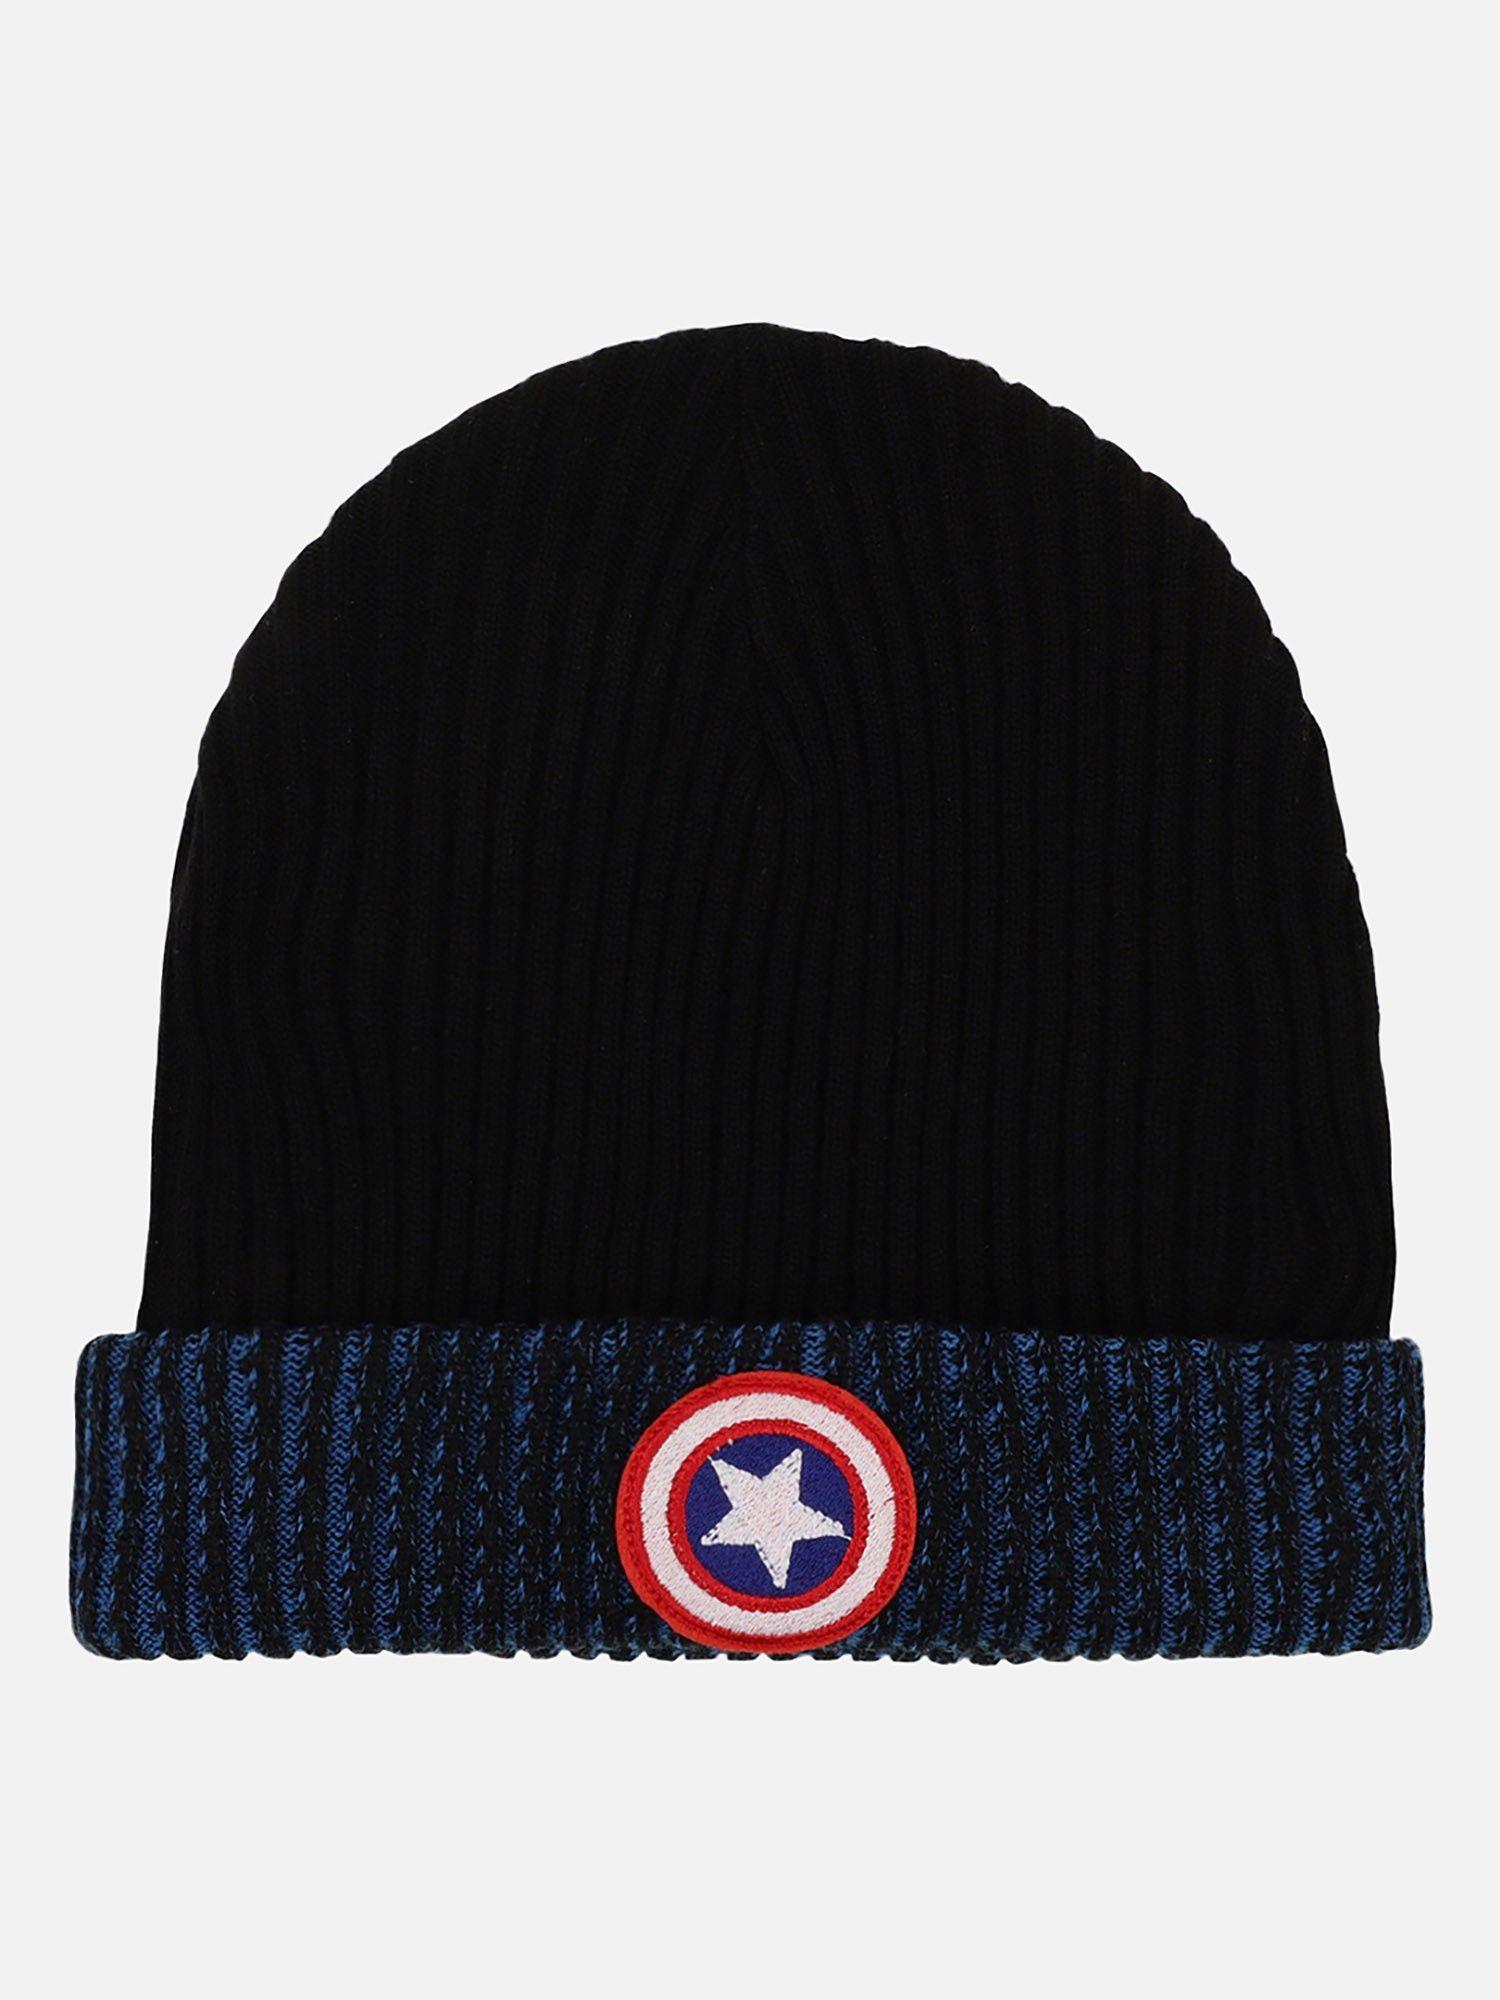 captain-america-featured-black/blue-beanies-for-young-men